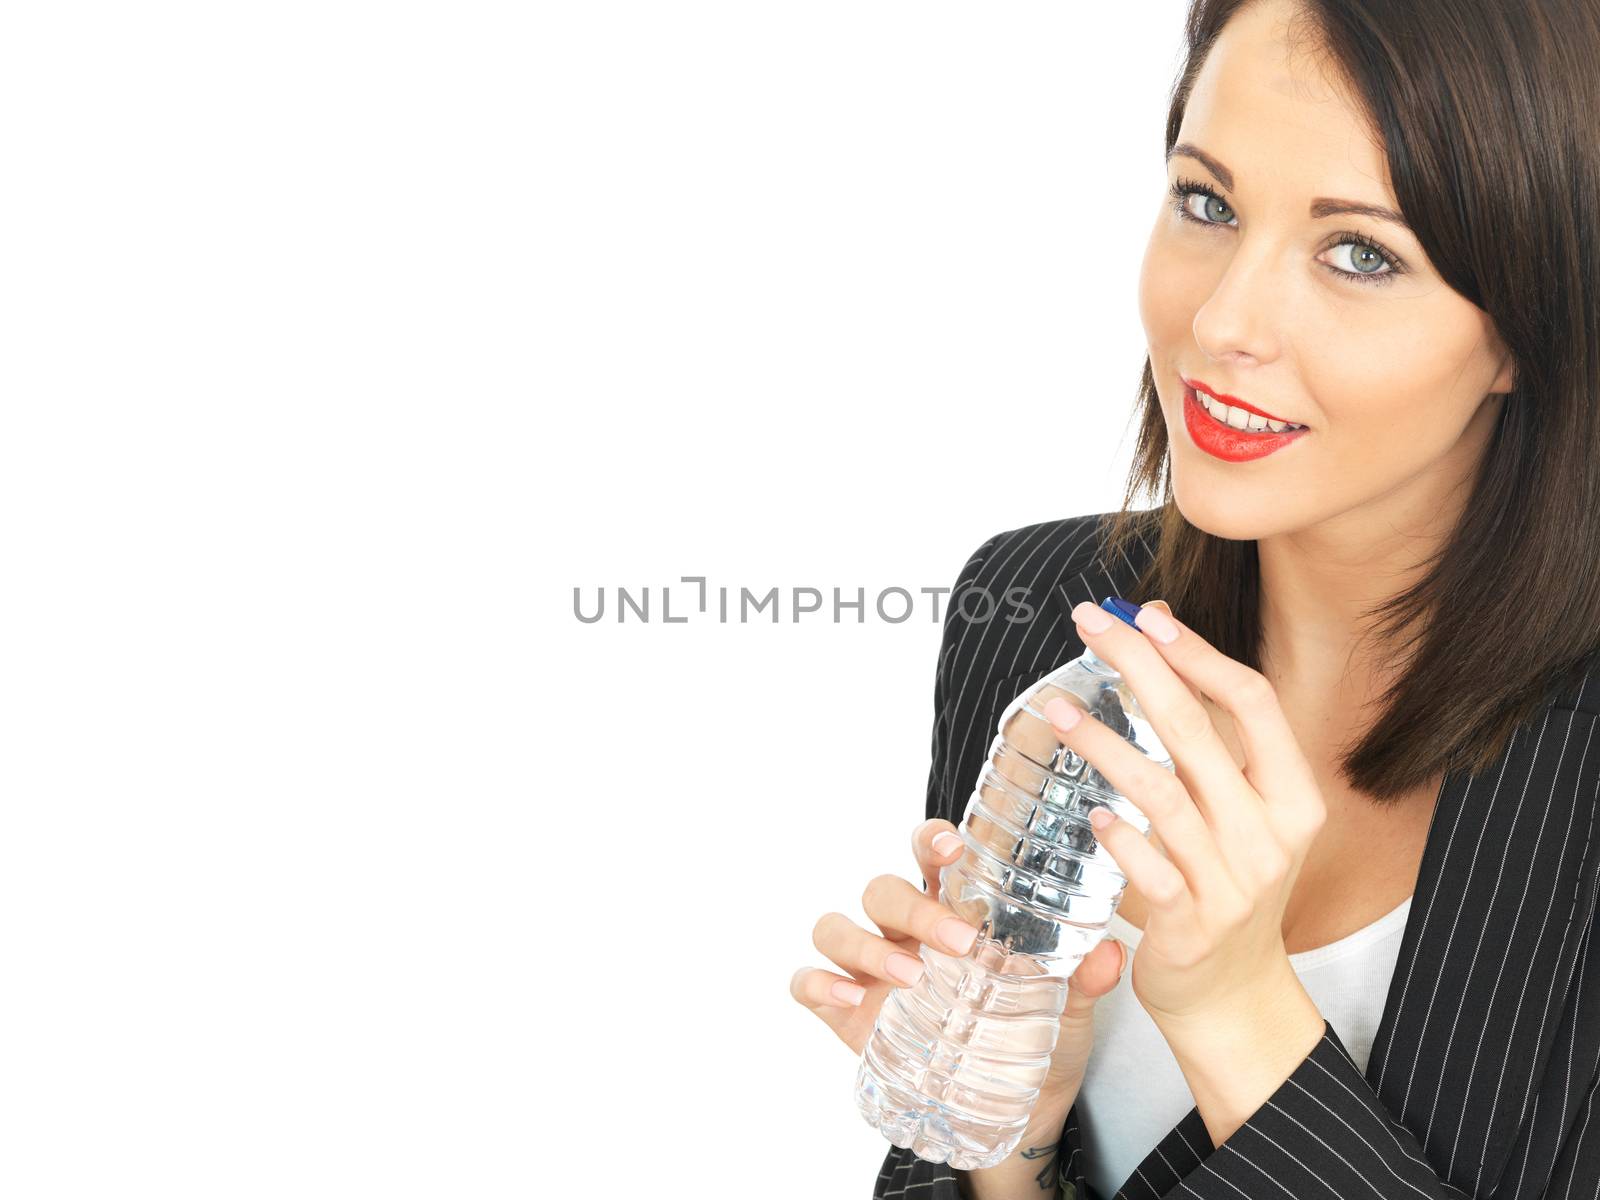 Young Business Woman Drinking a Bottle of Water by Whiteboxmedia